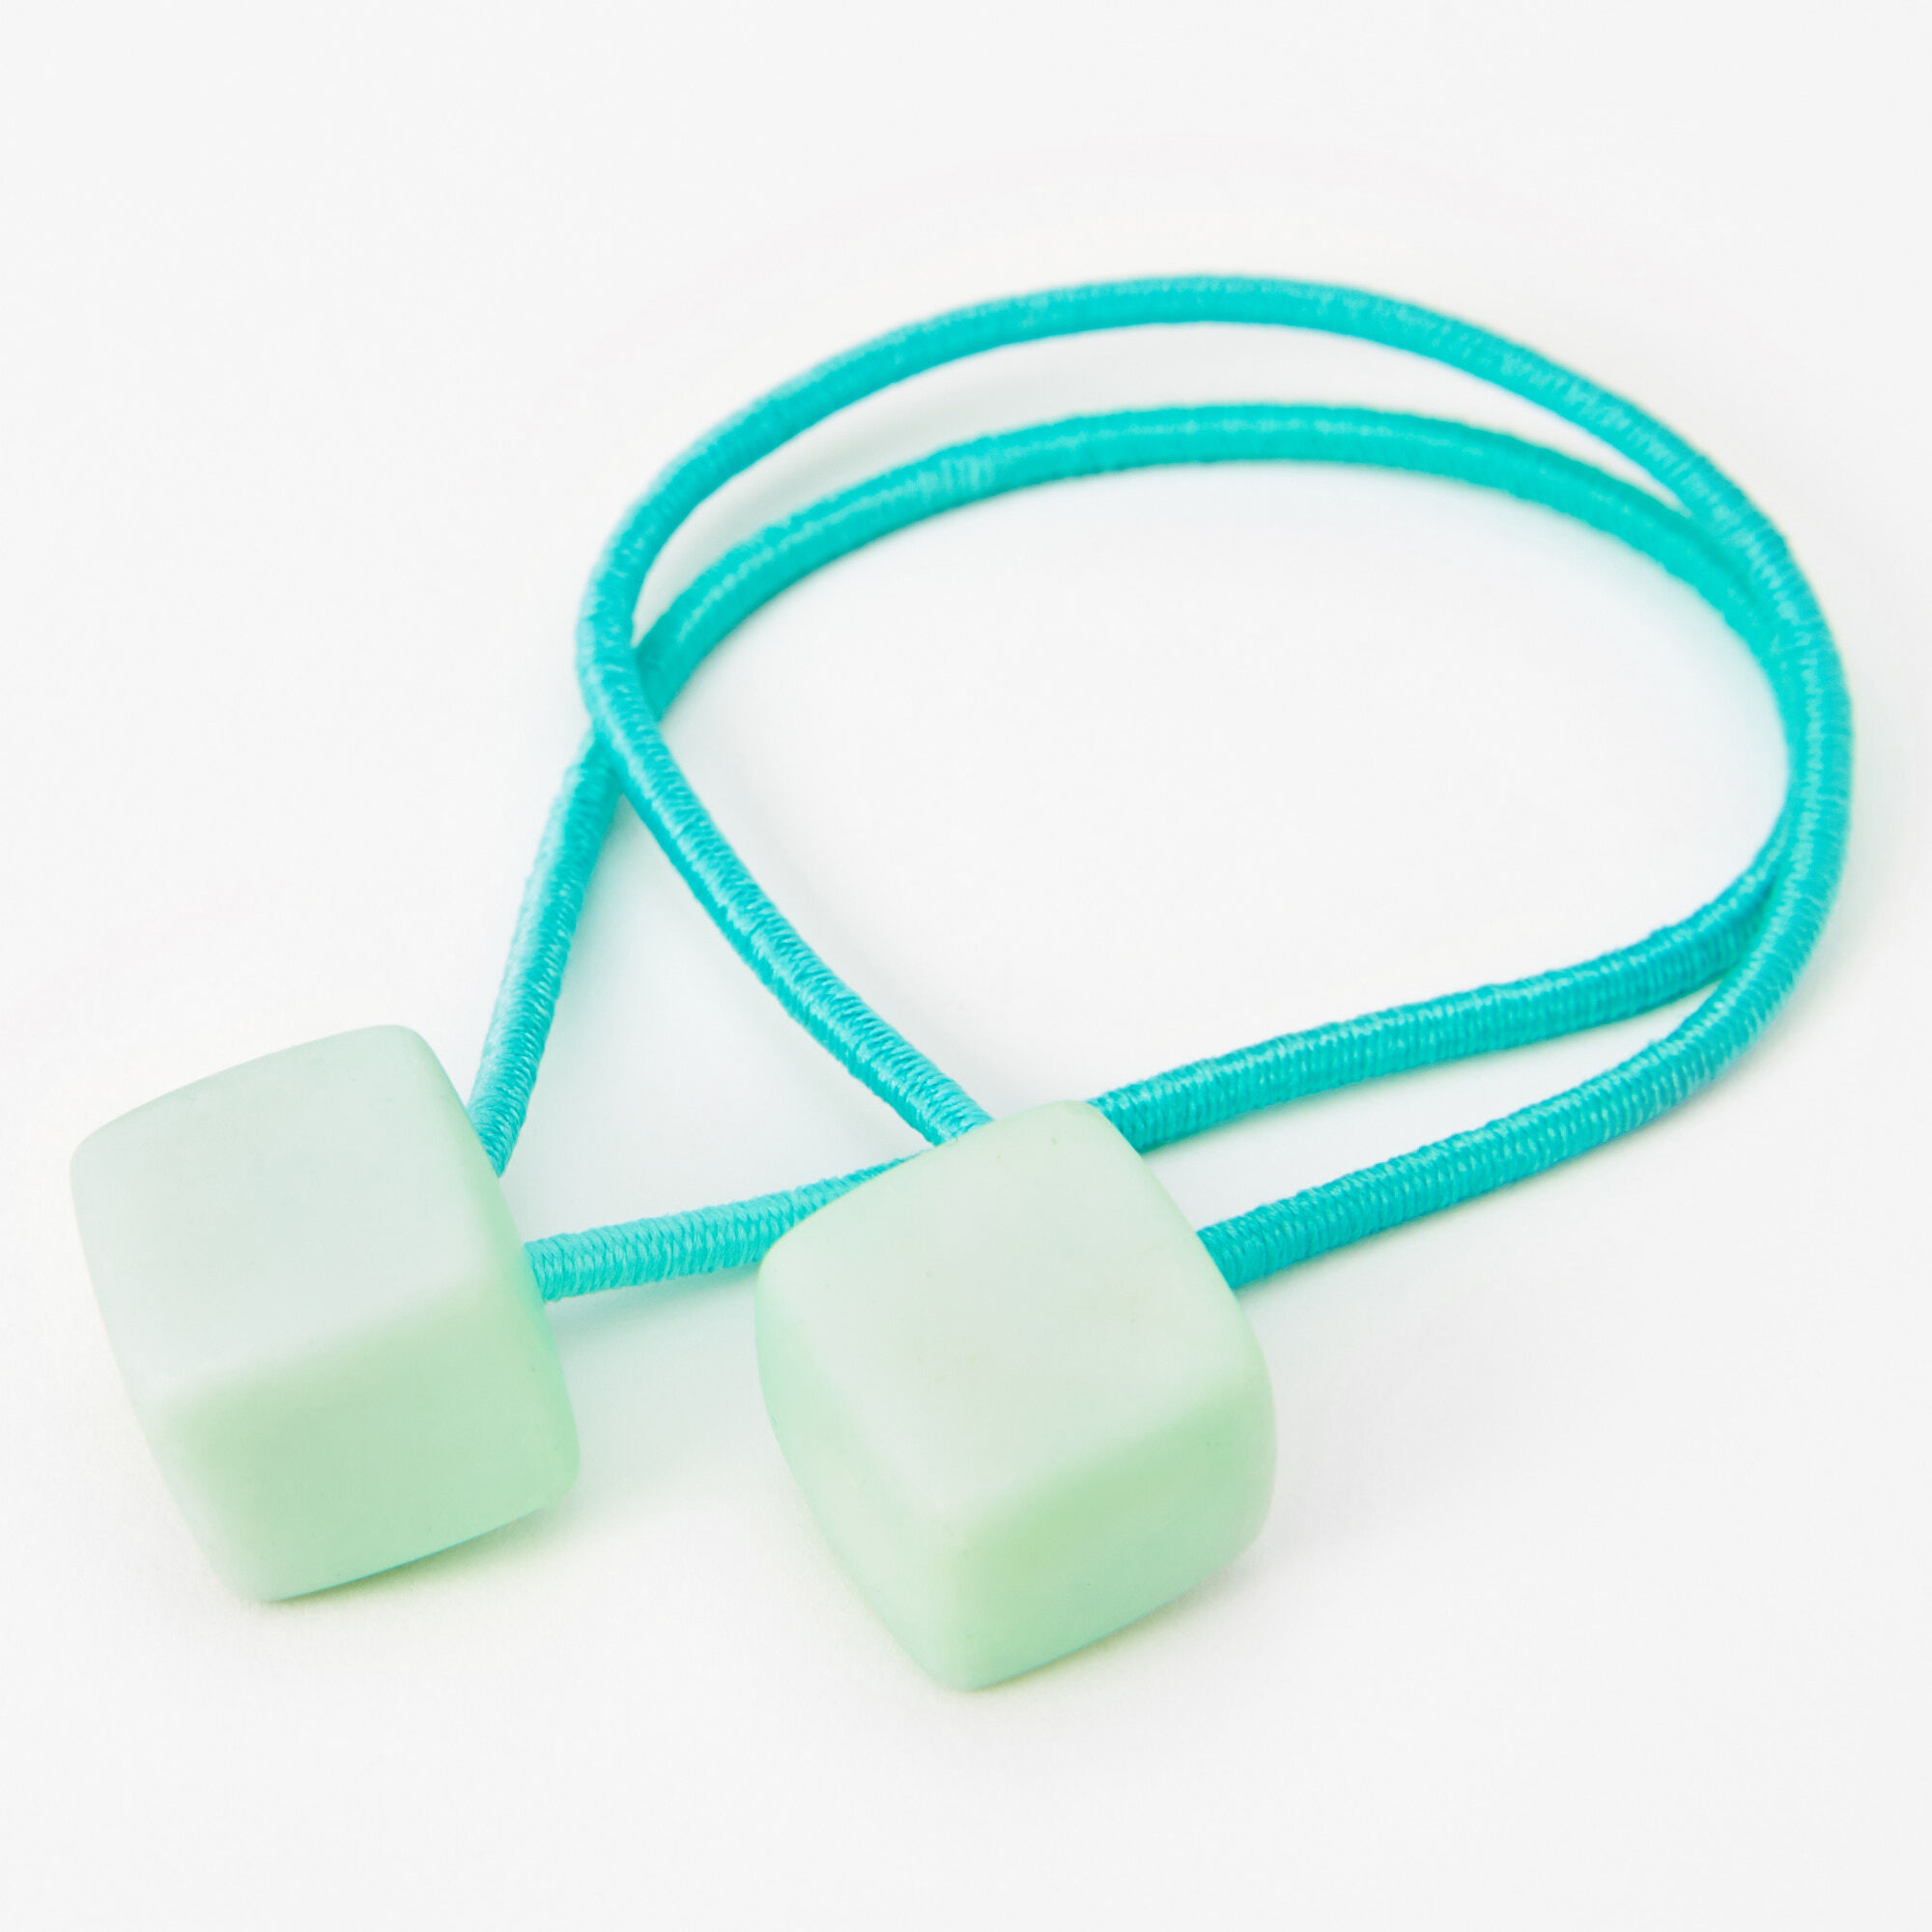 Claire's Mint Green Geometric Hair Ties | 2 Pack